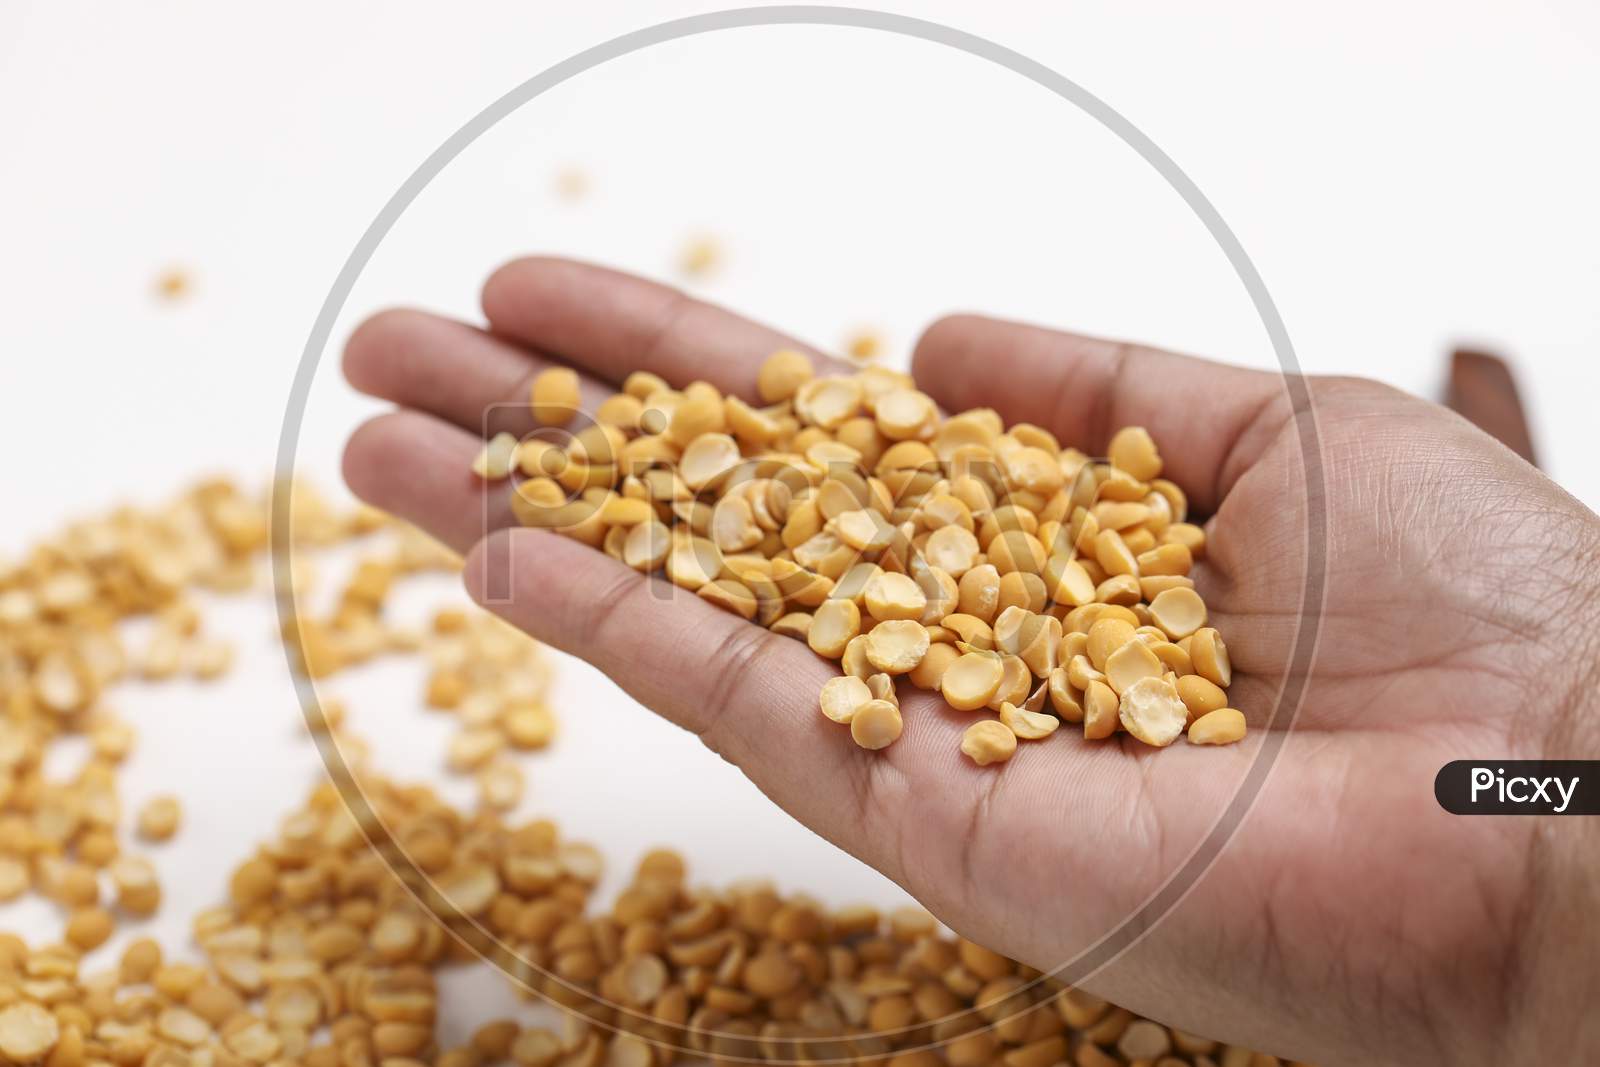 Dried Chickpea Lentils In Hand On White Background , Split Chickpea Also Know As Chana Dal ,